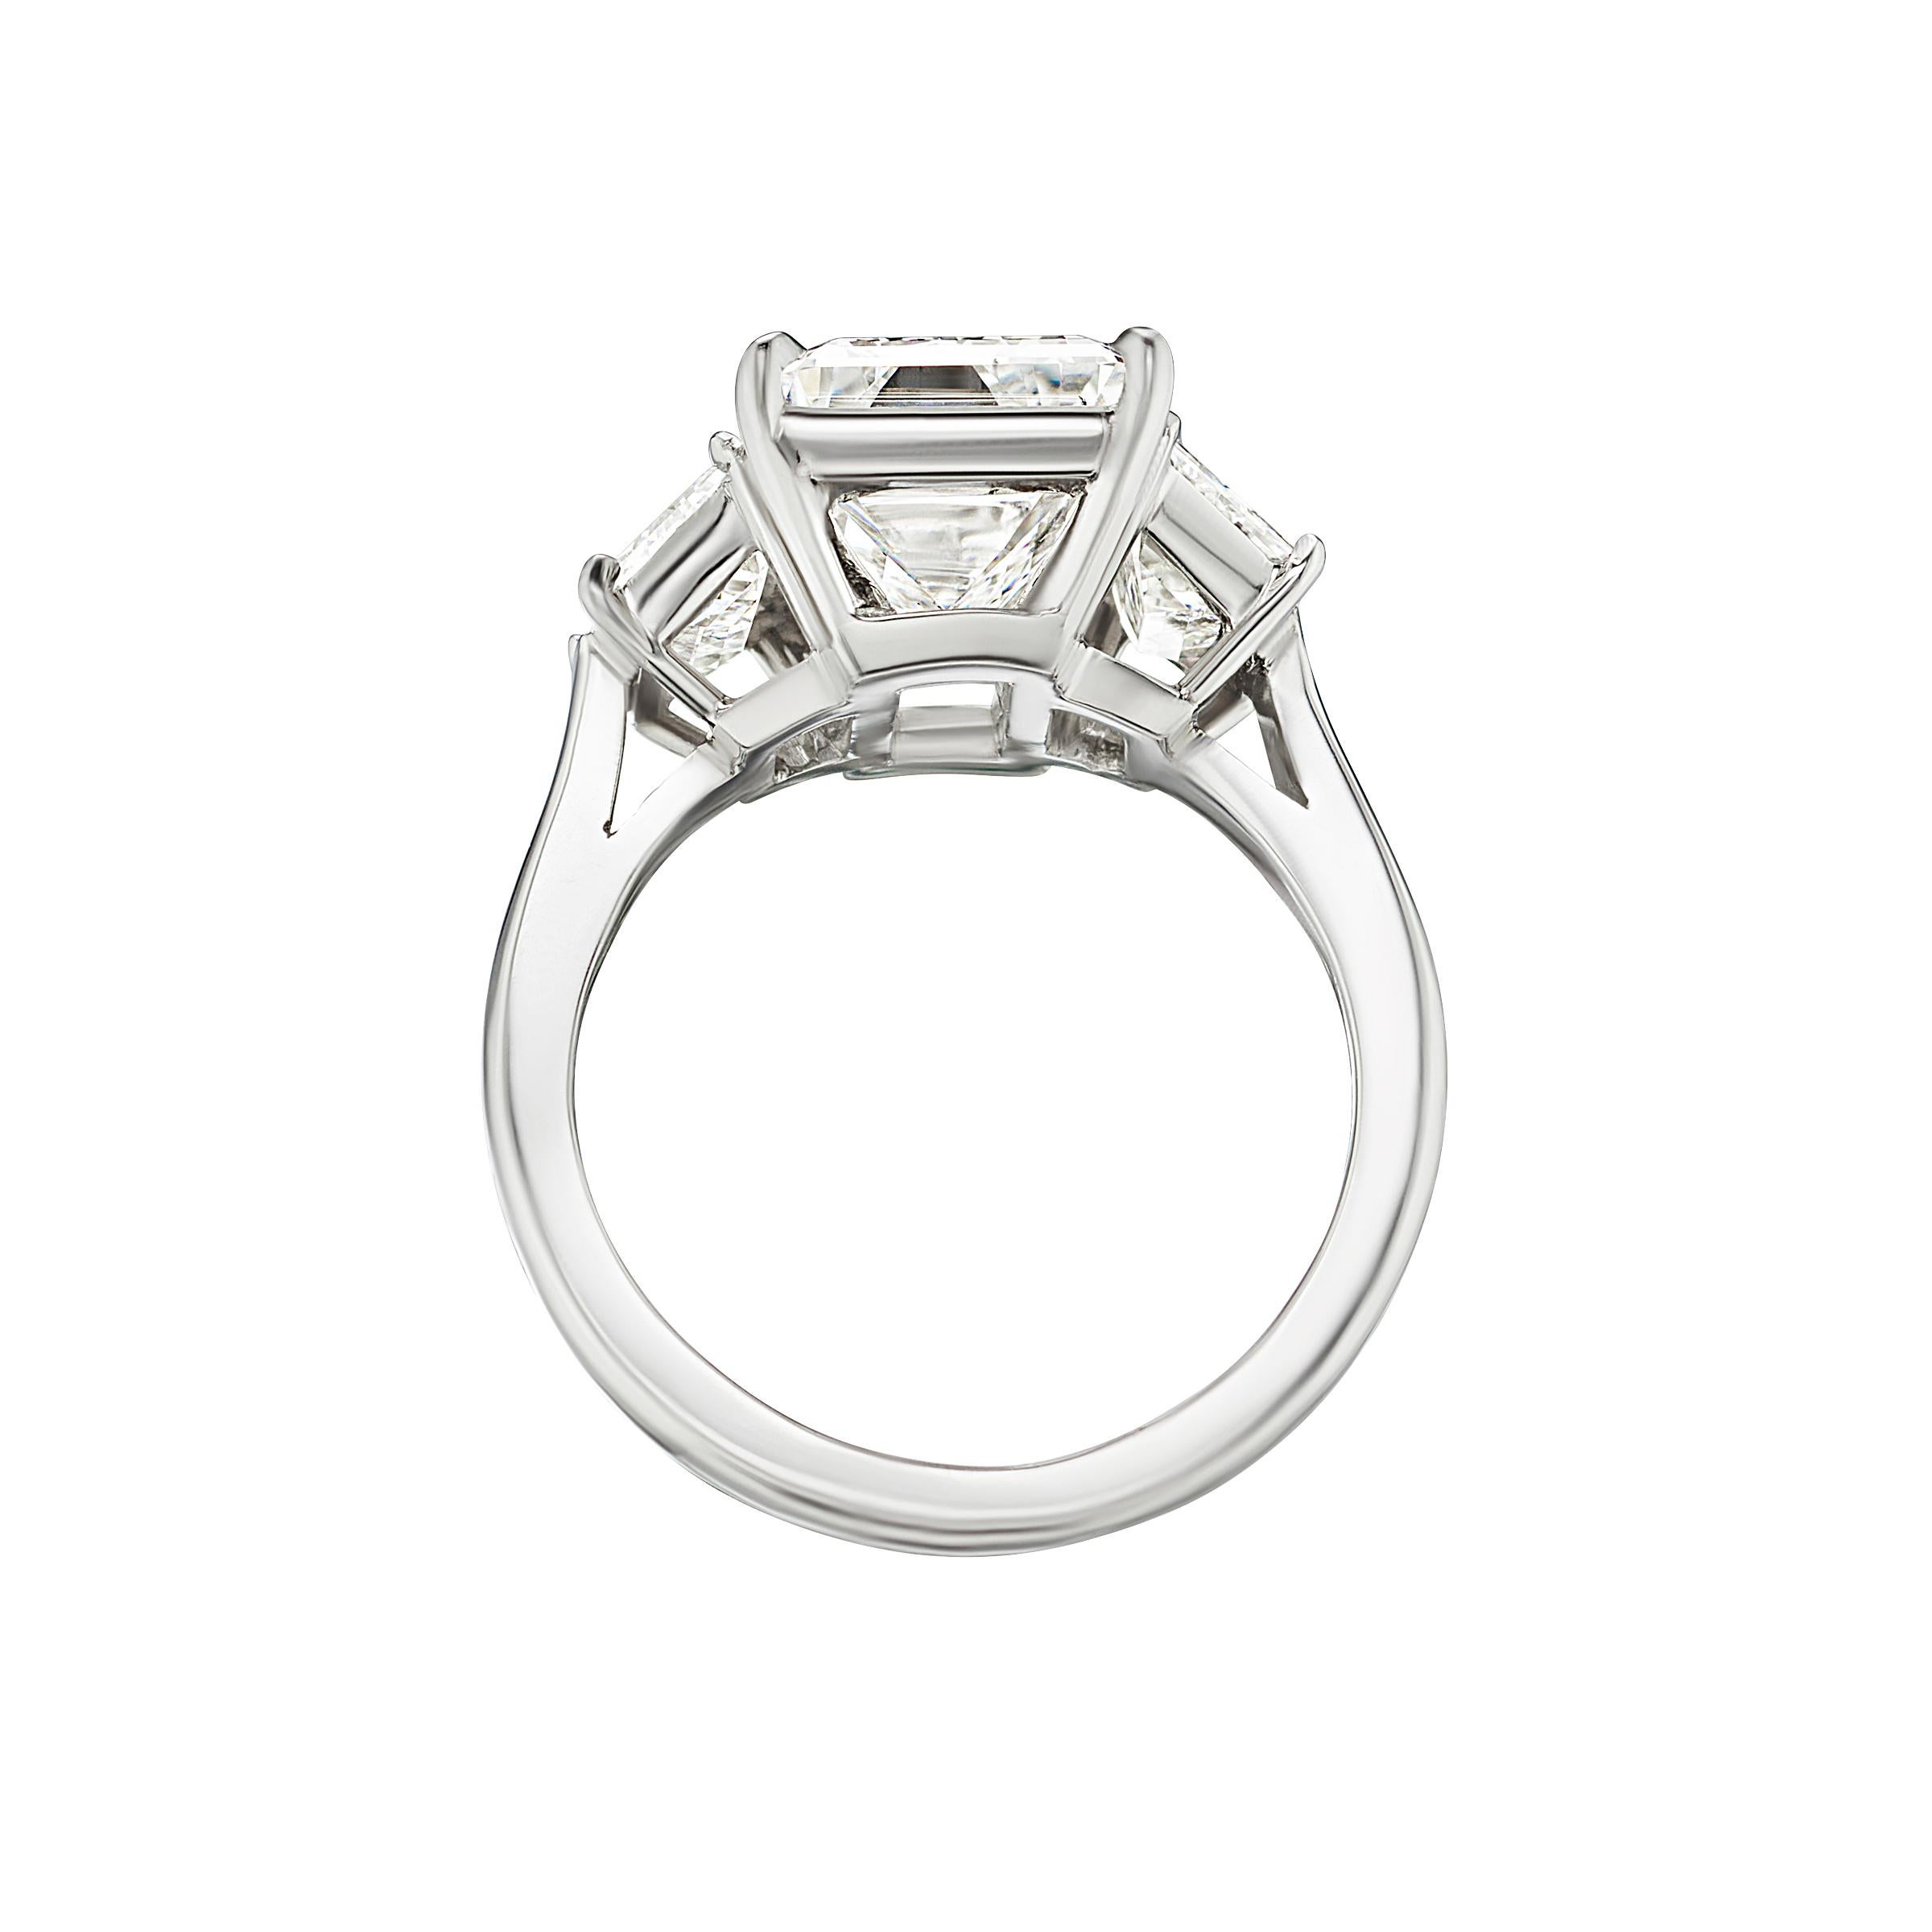 Antinori Fine Jewels is proud to offer this important and impressive 4.82 carat GIA certified Internally Flawless E Color Emerald cut diamond ring.

This beautiful and rare three-stone ring showcasing a flawless yes flawless! clarity emerald cut